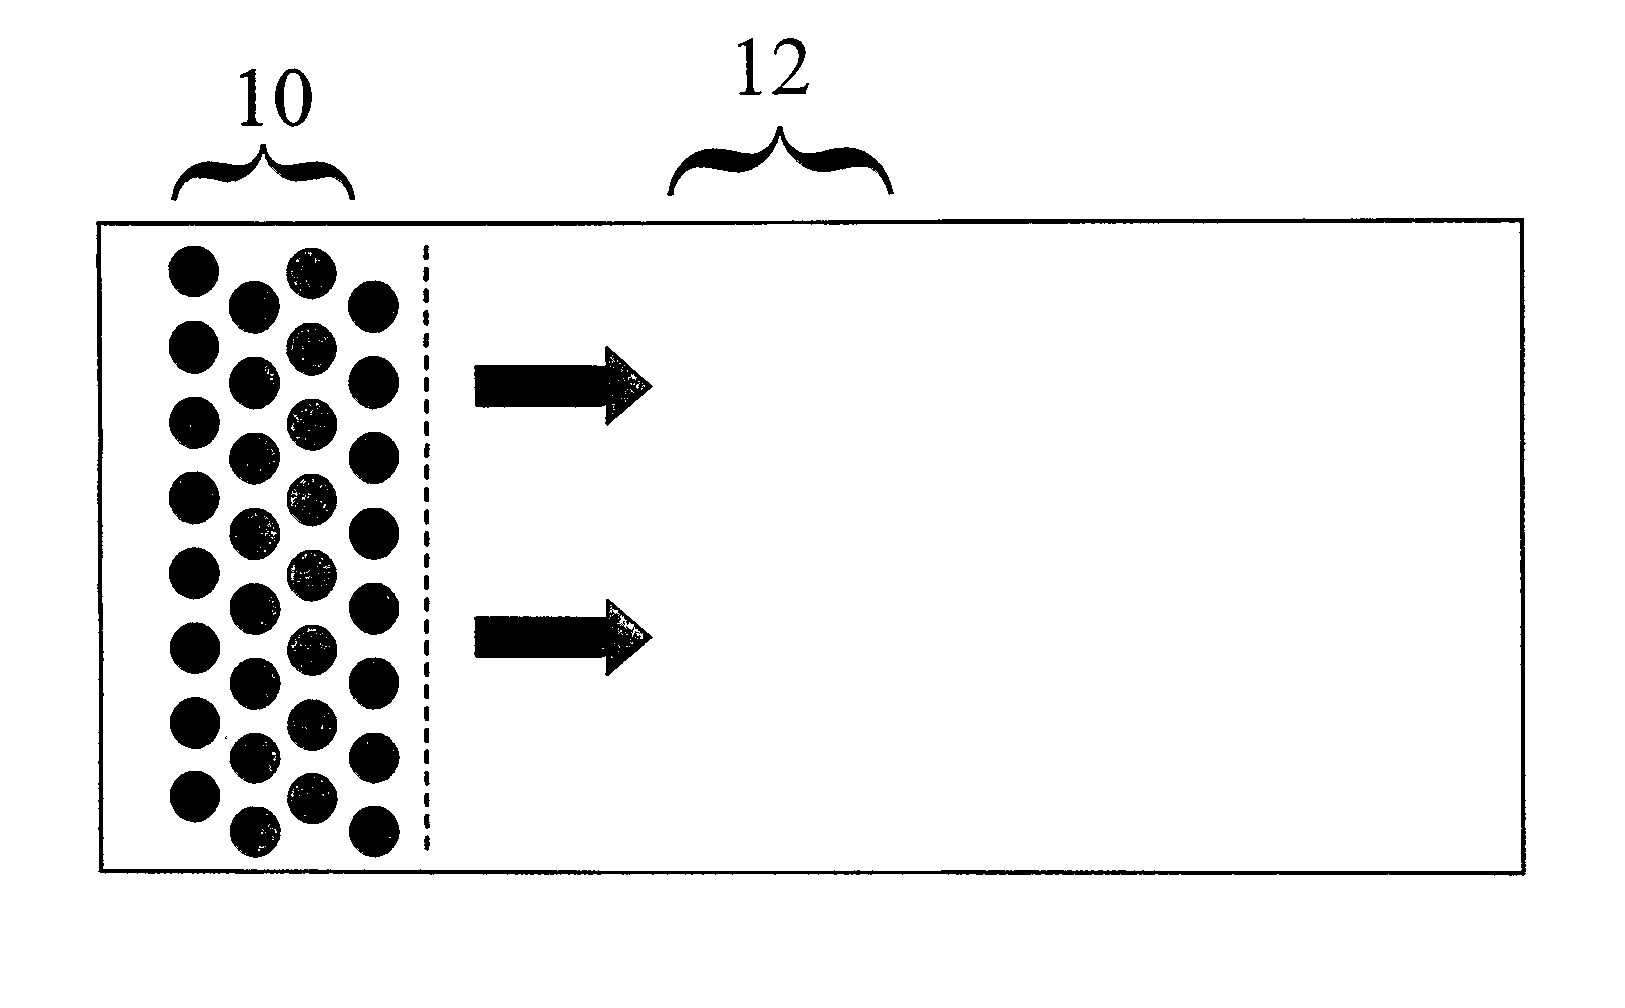 Method for fabricating a long-range ordered periodic array of nano-features, and articles comprising same